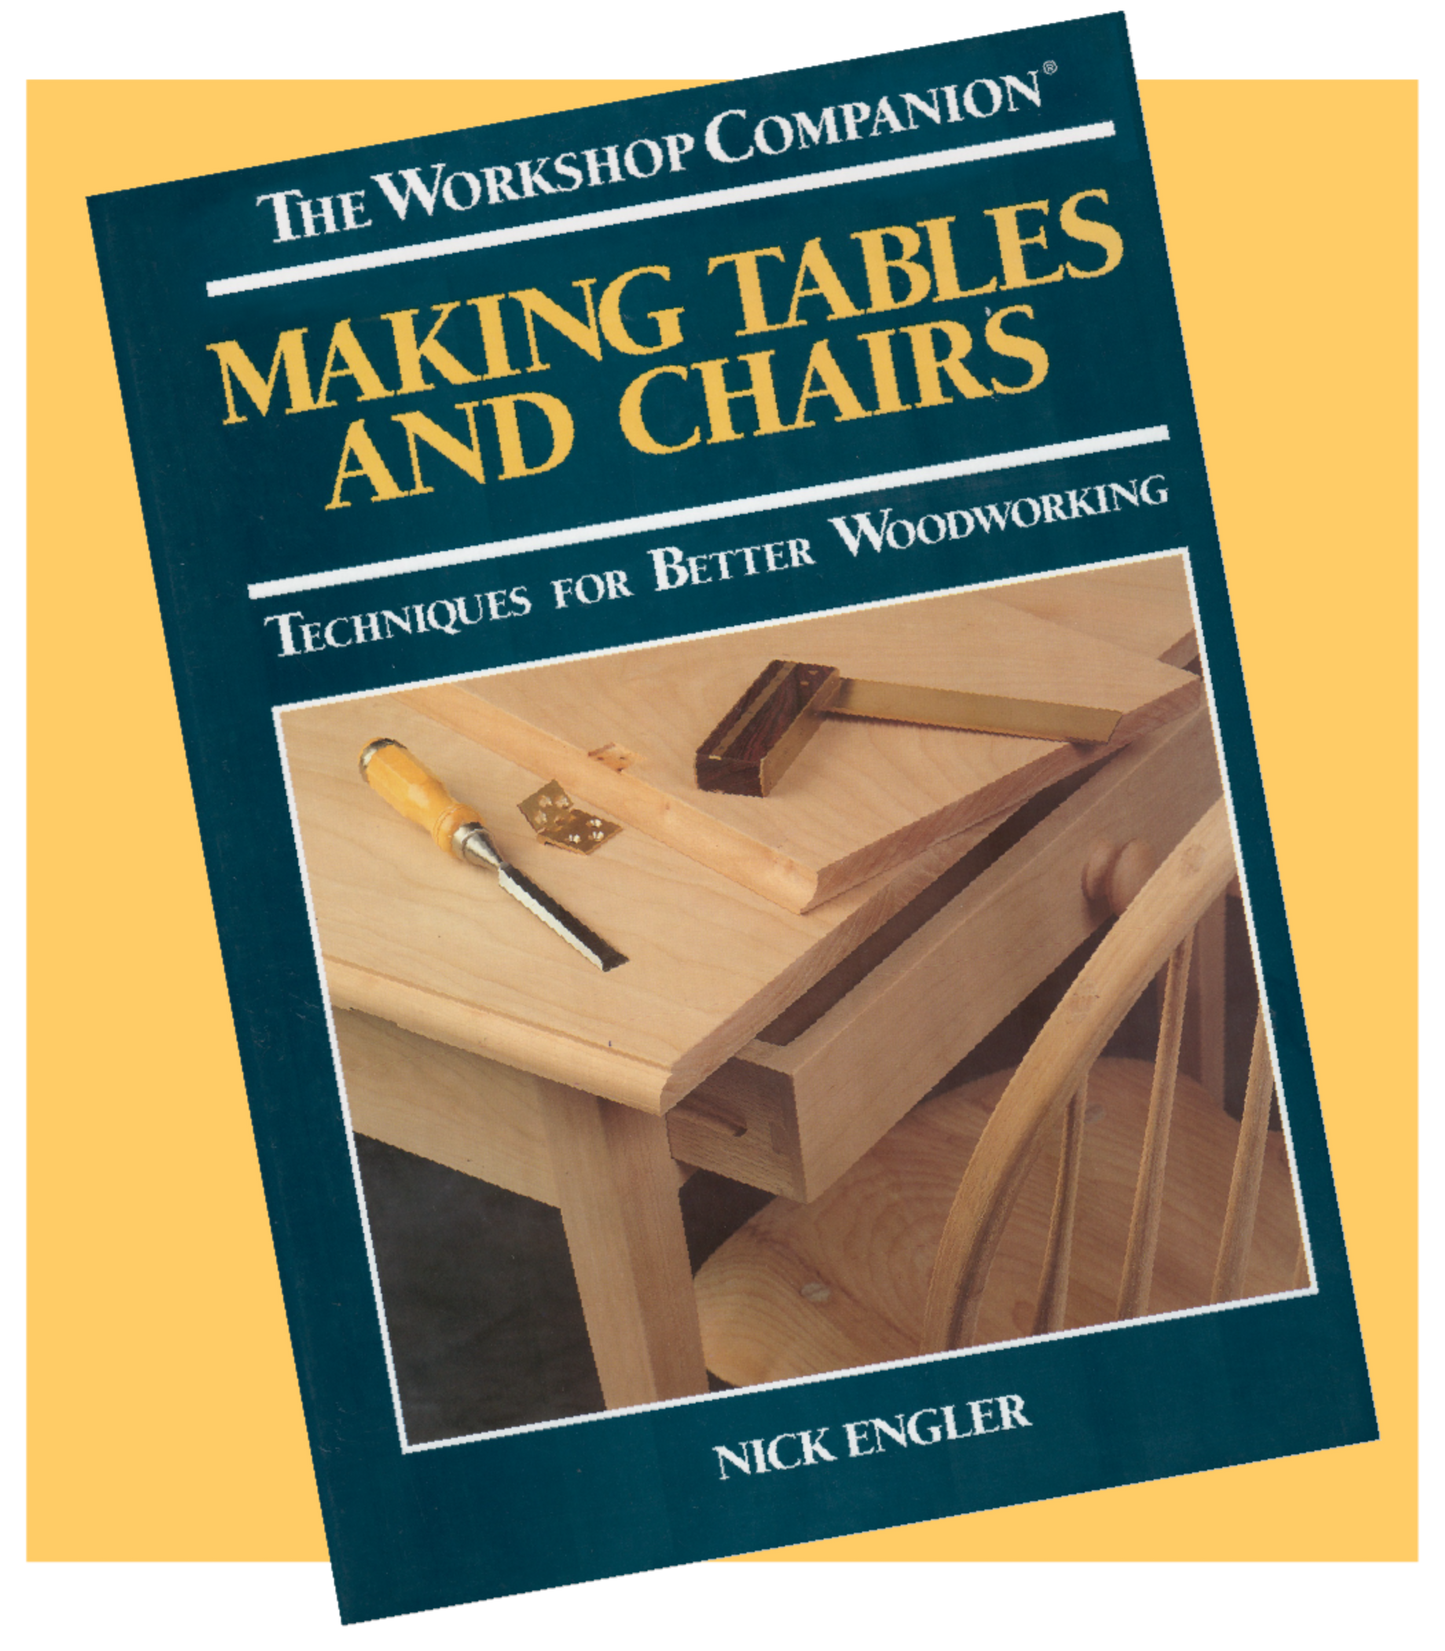 Making Tables and Chairs